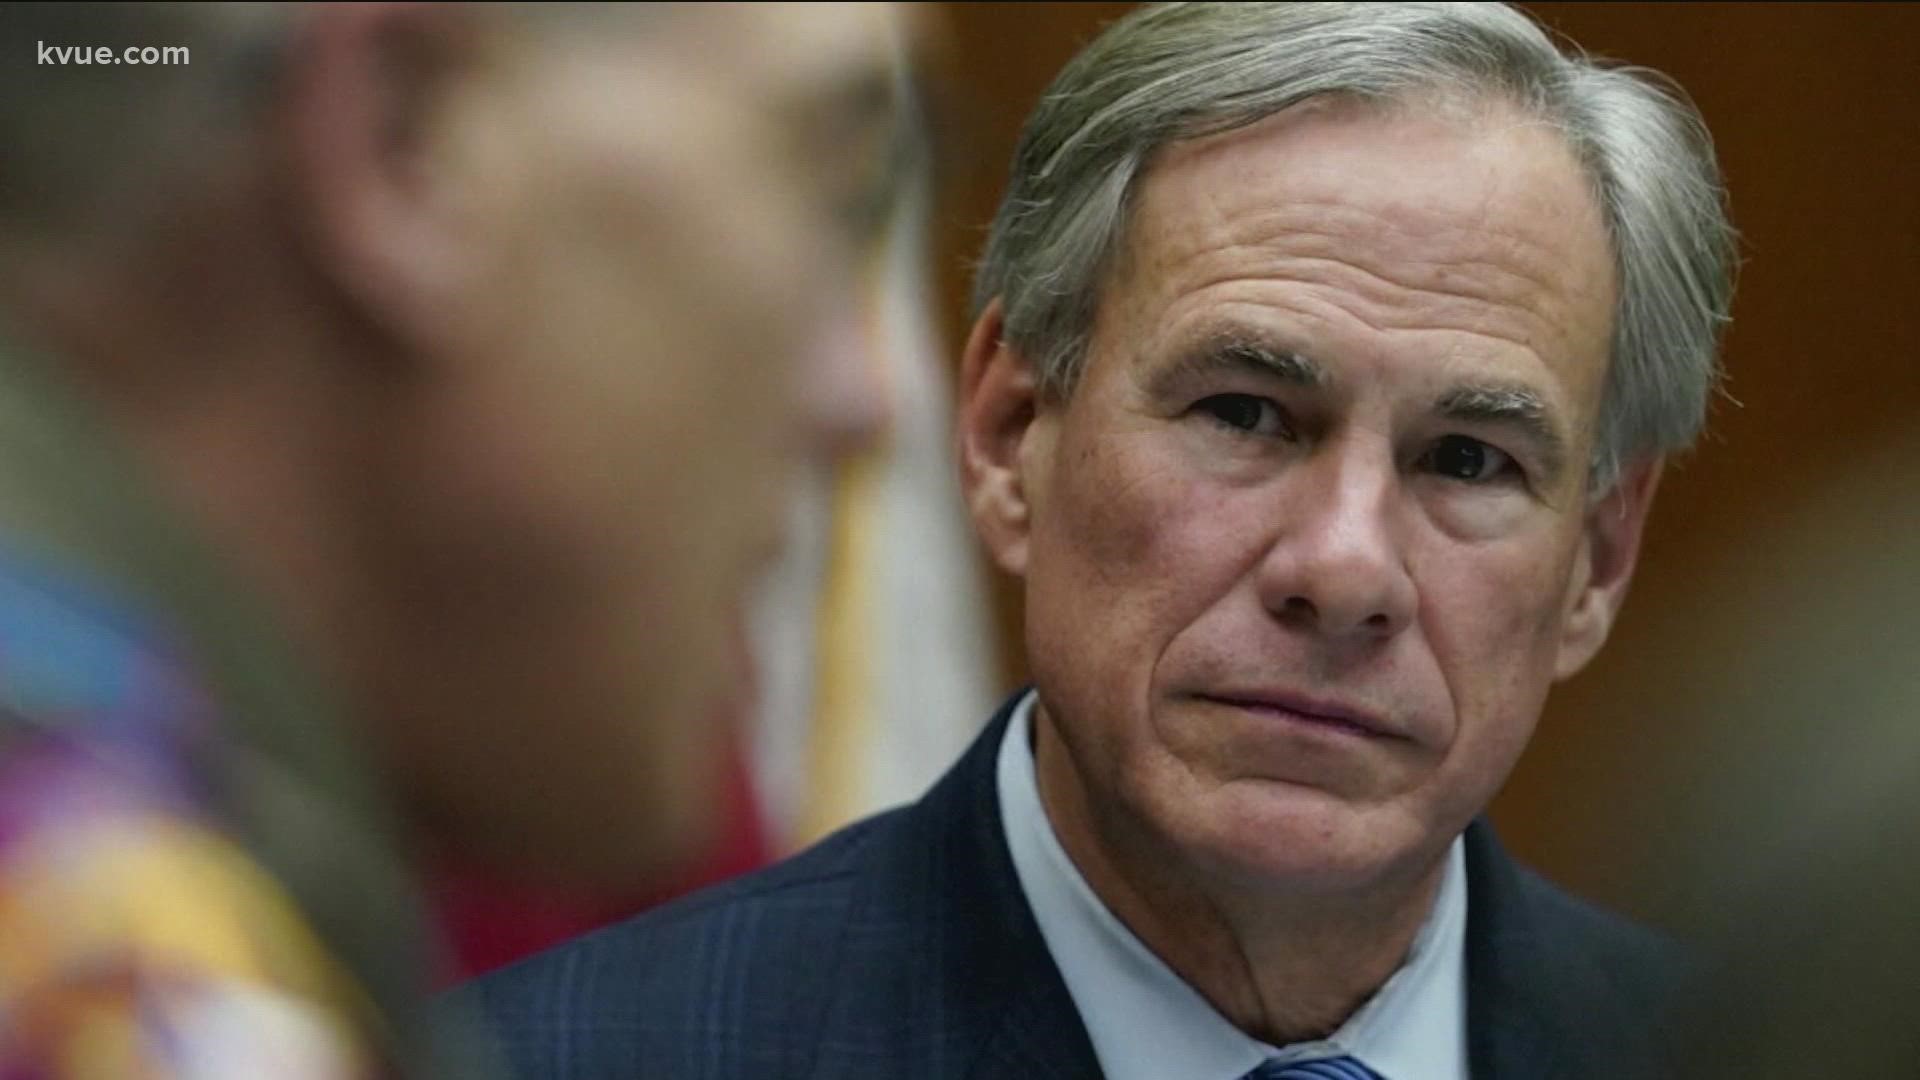 Gov. Greg Abbott is challenging the federal government's vaccine-or-test mandate in the U.S. appeals court.